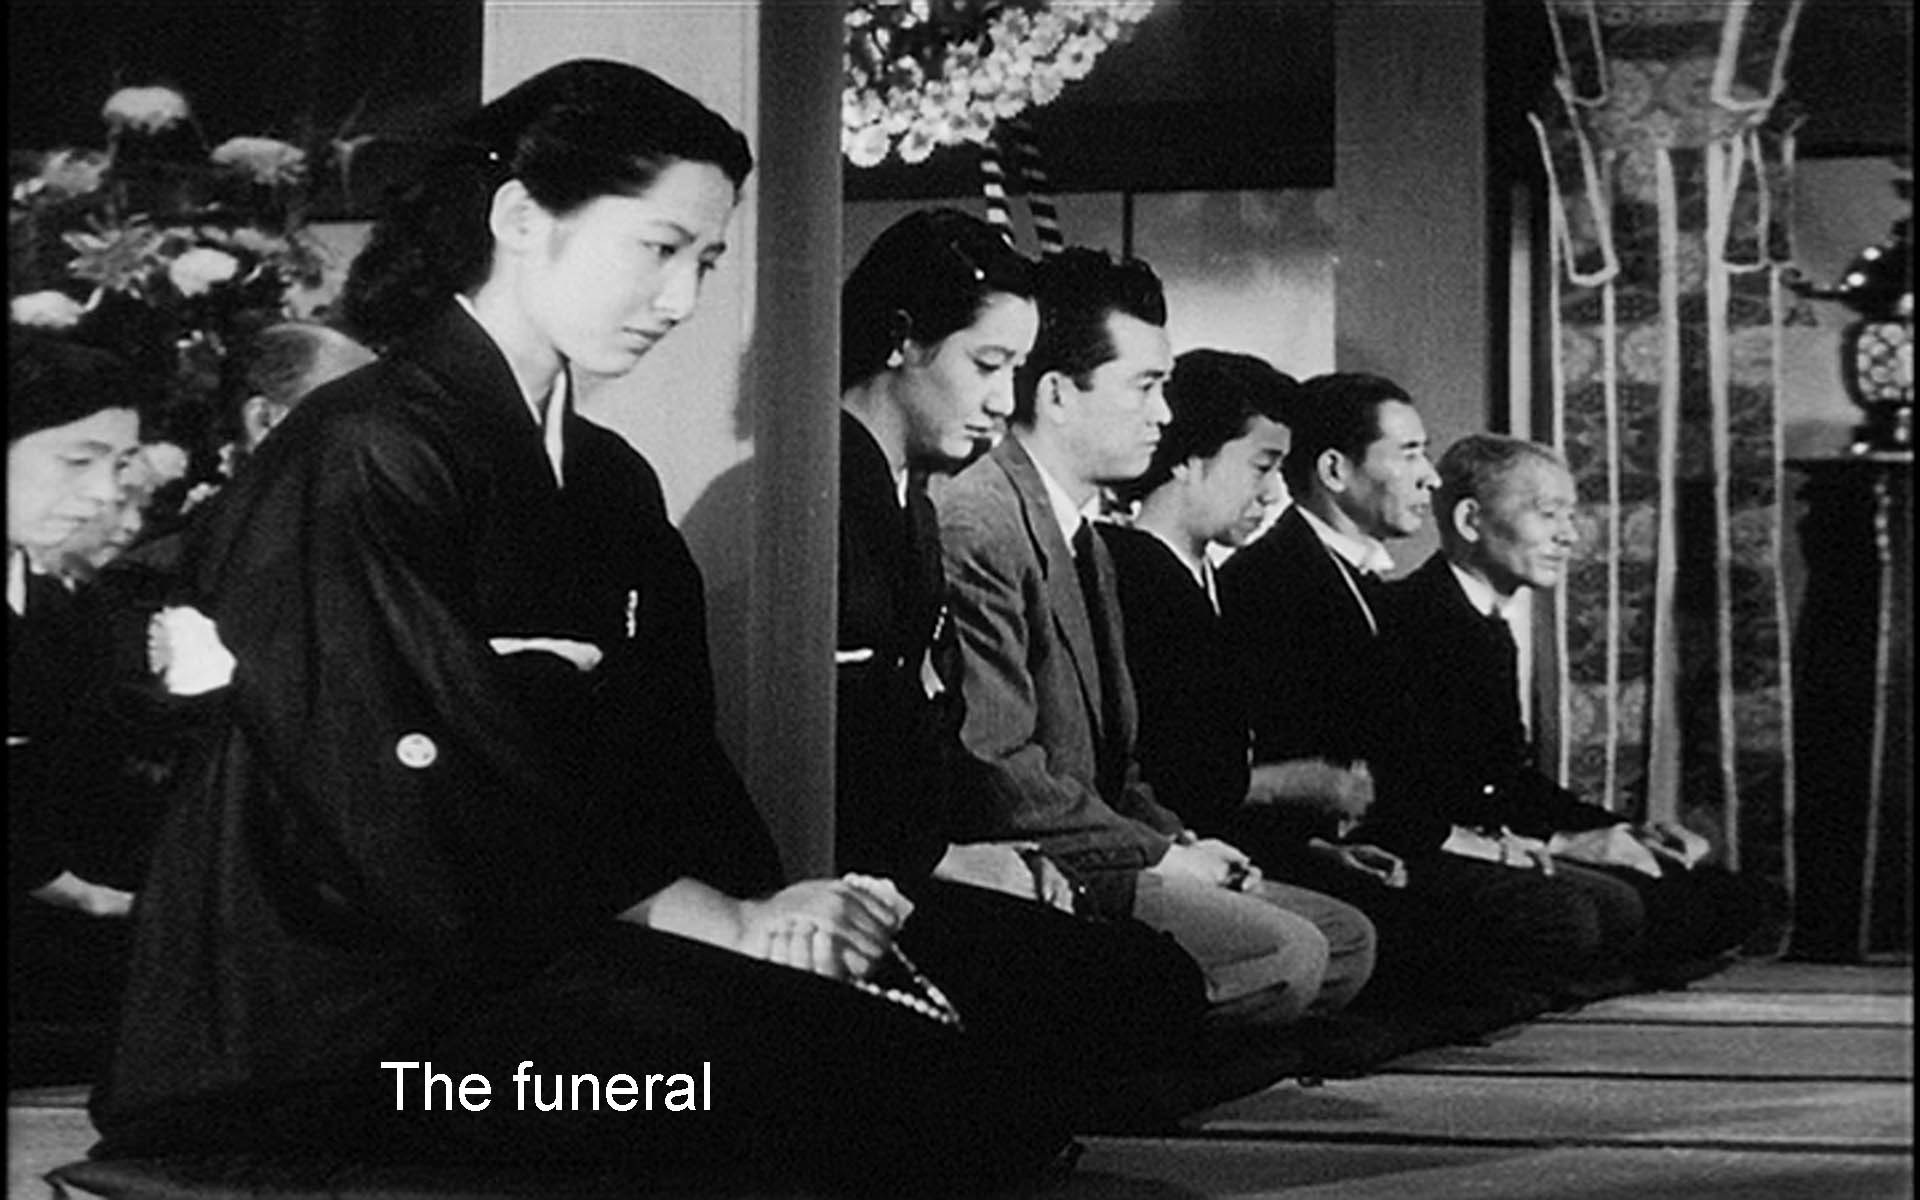 The funeral